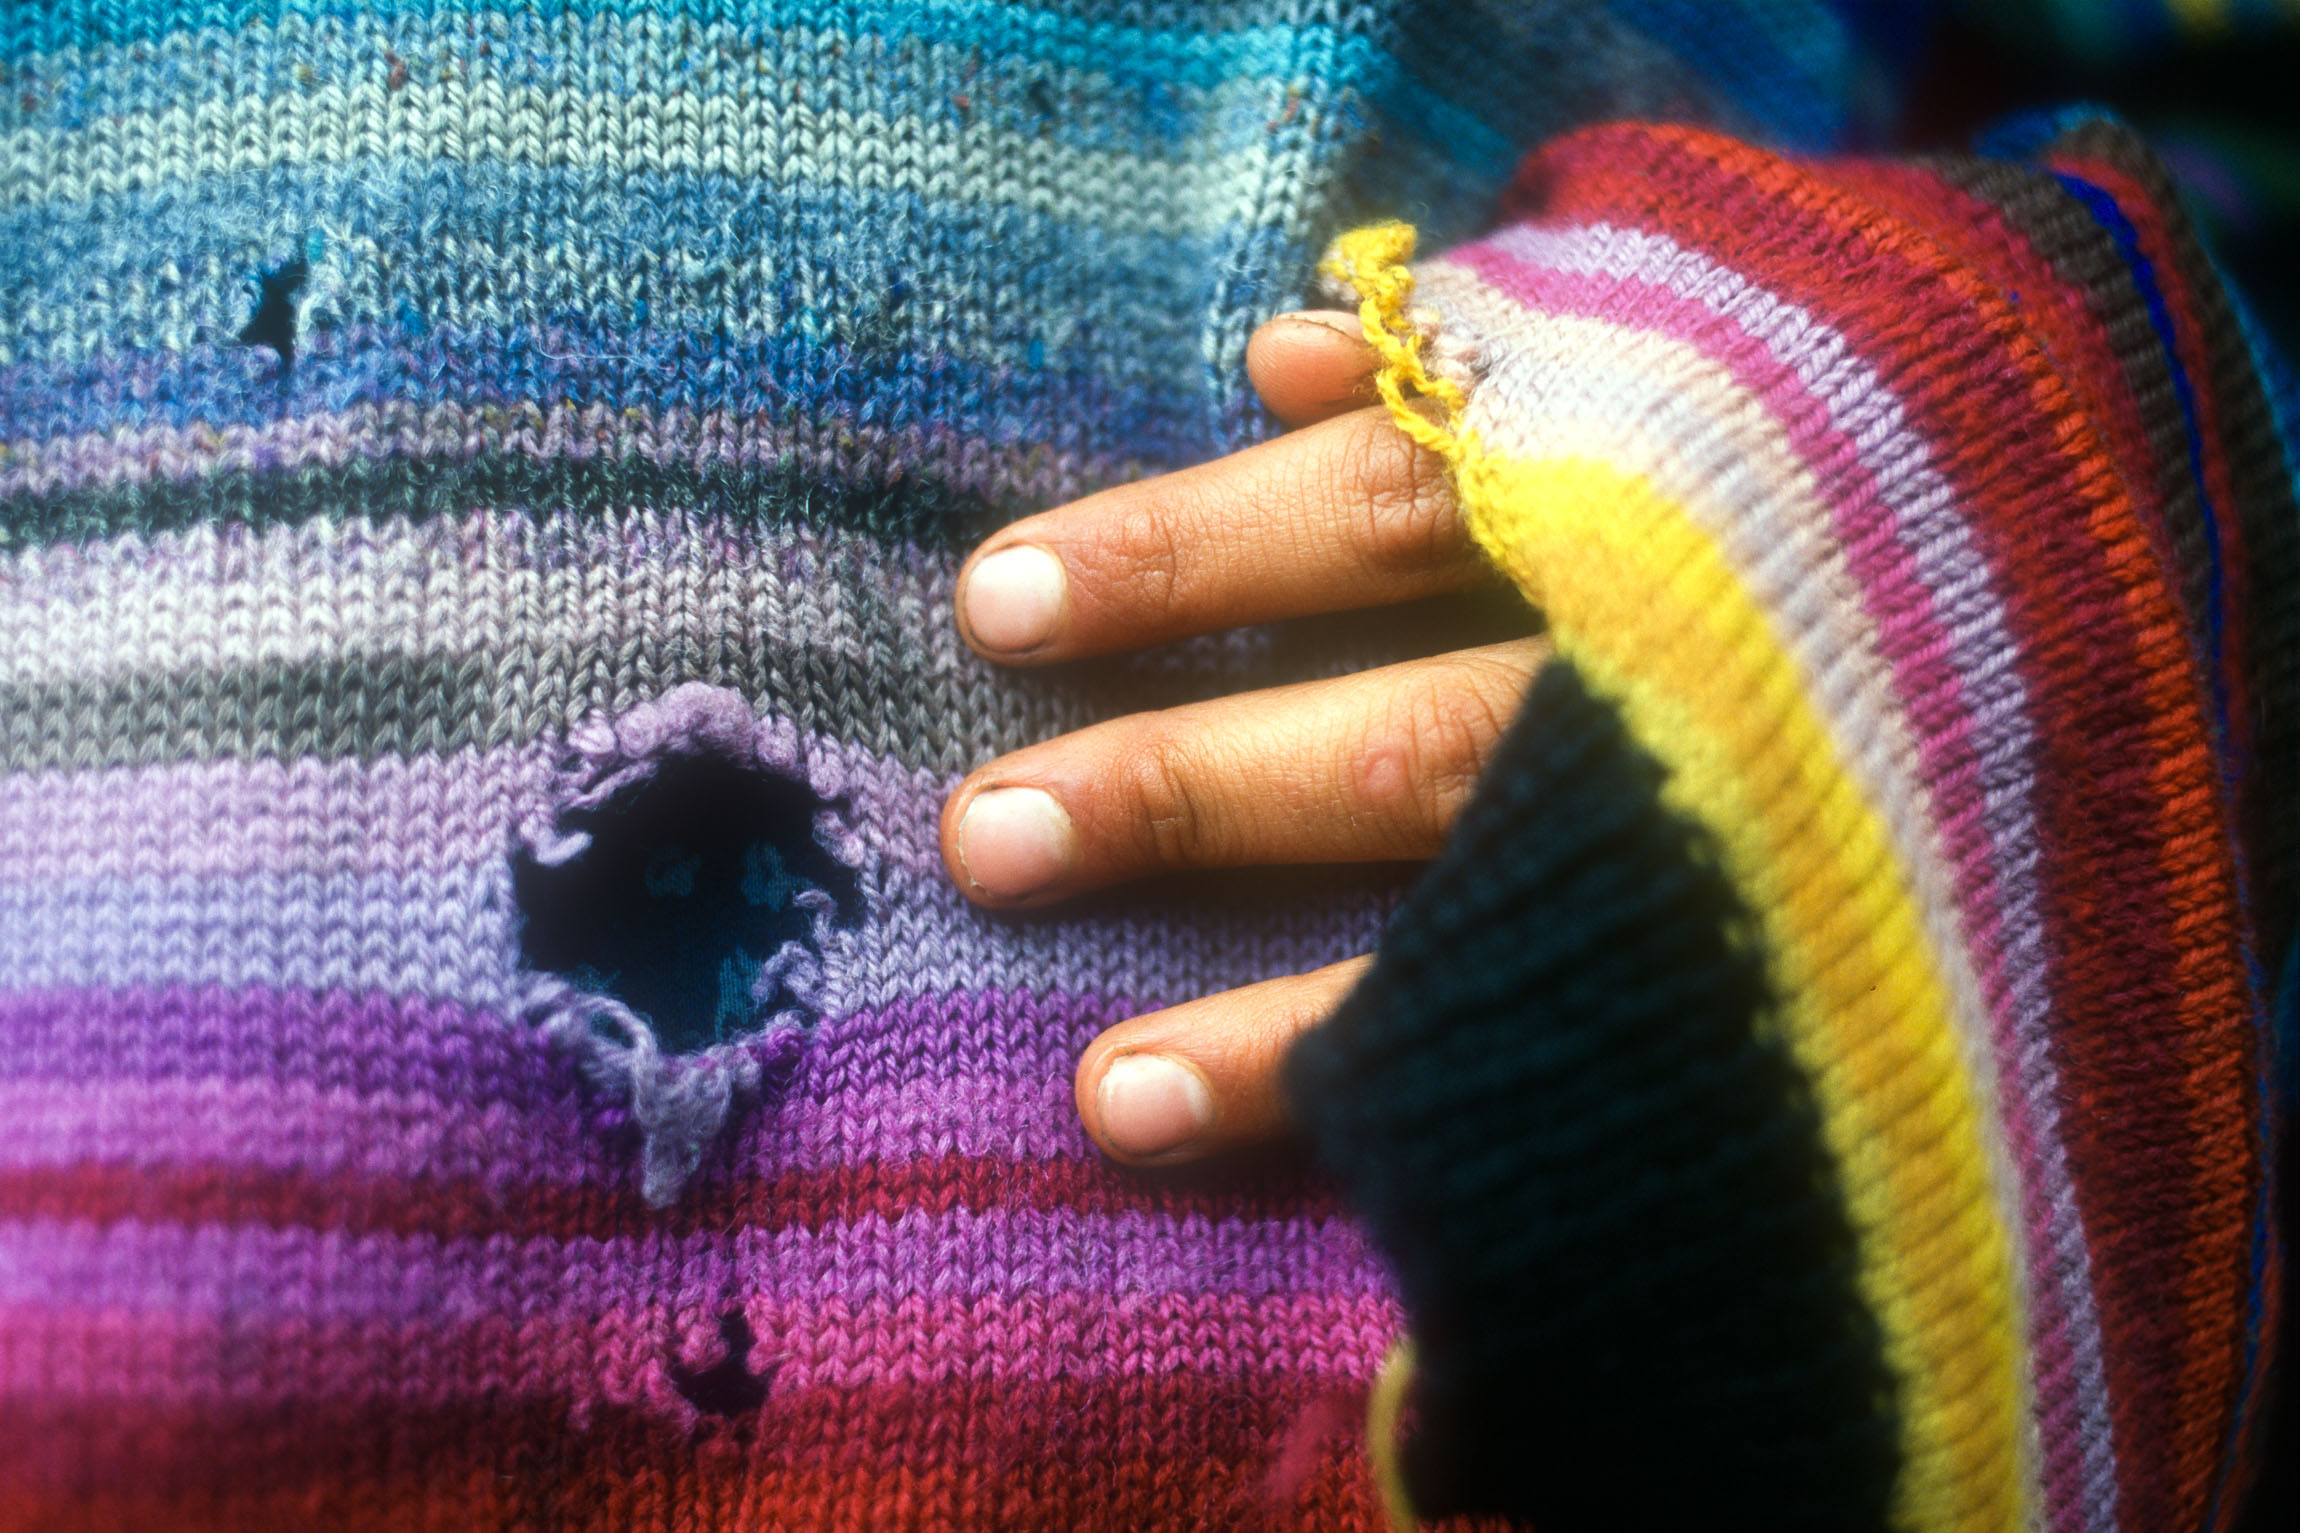 A hole in a protester's woollen sweater